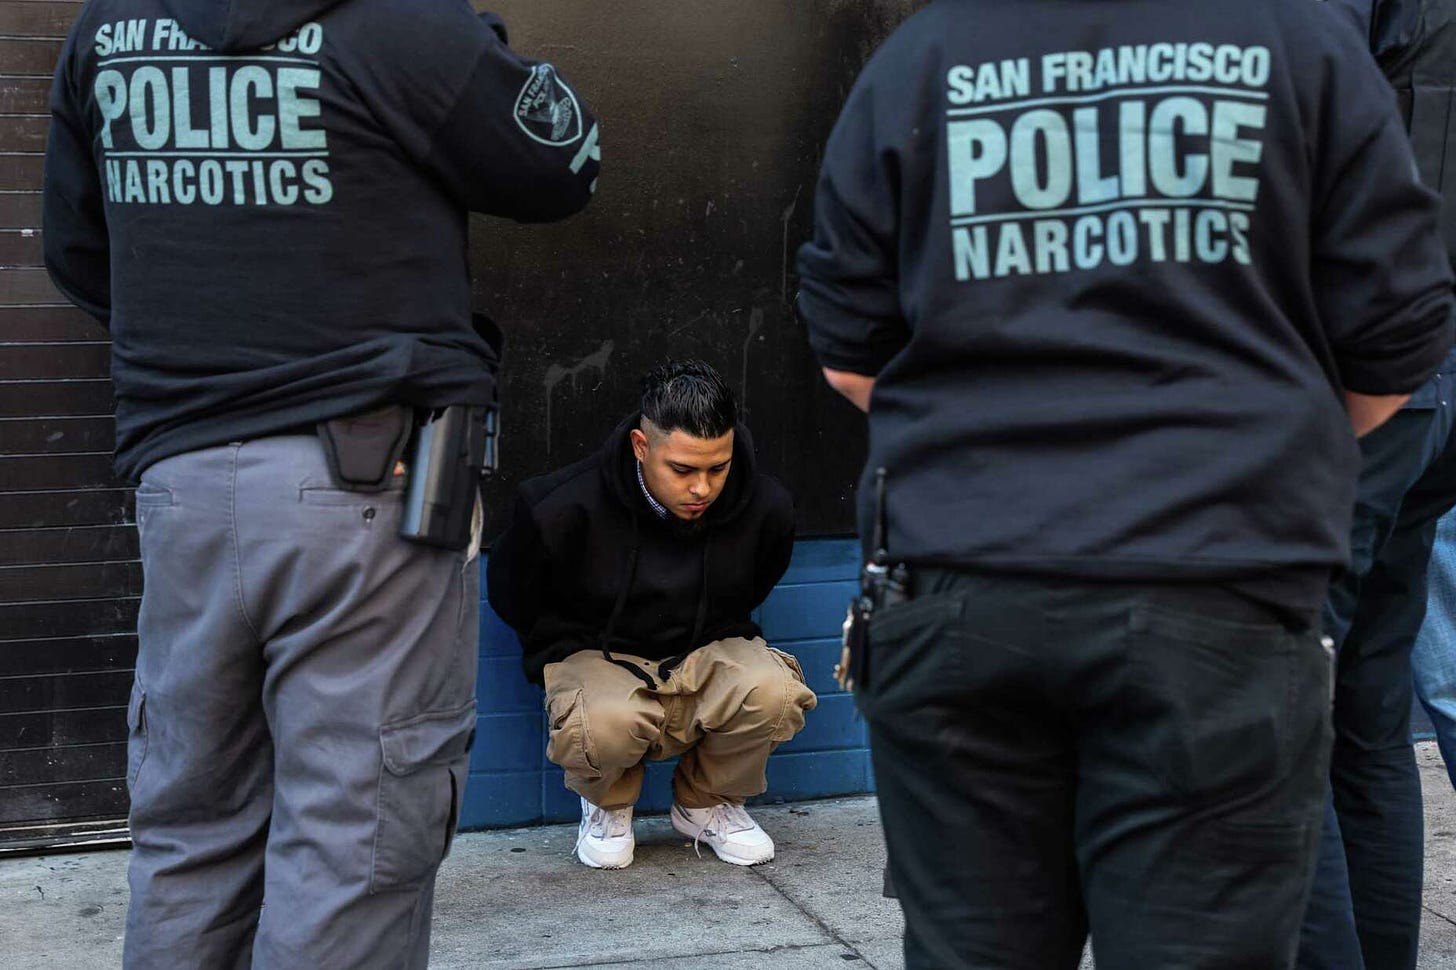 During a June buy-bust operation at Ninth and Mission streets in San Francisco, police arrest a Honduran they say was selling fentanyl, meth and crack.